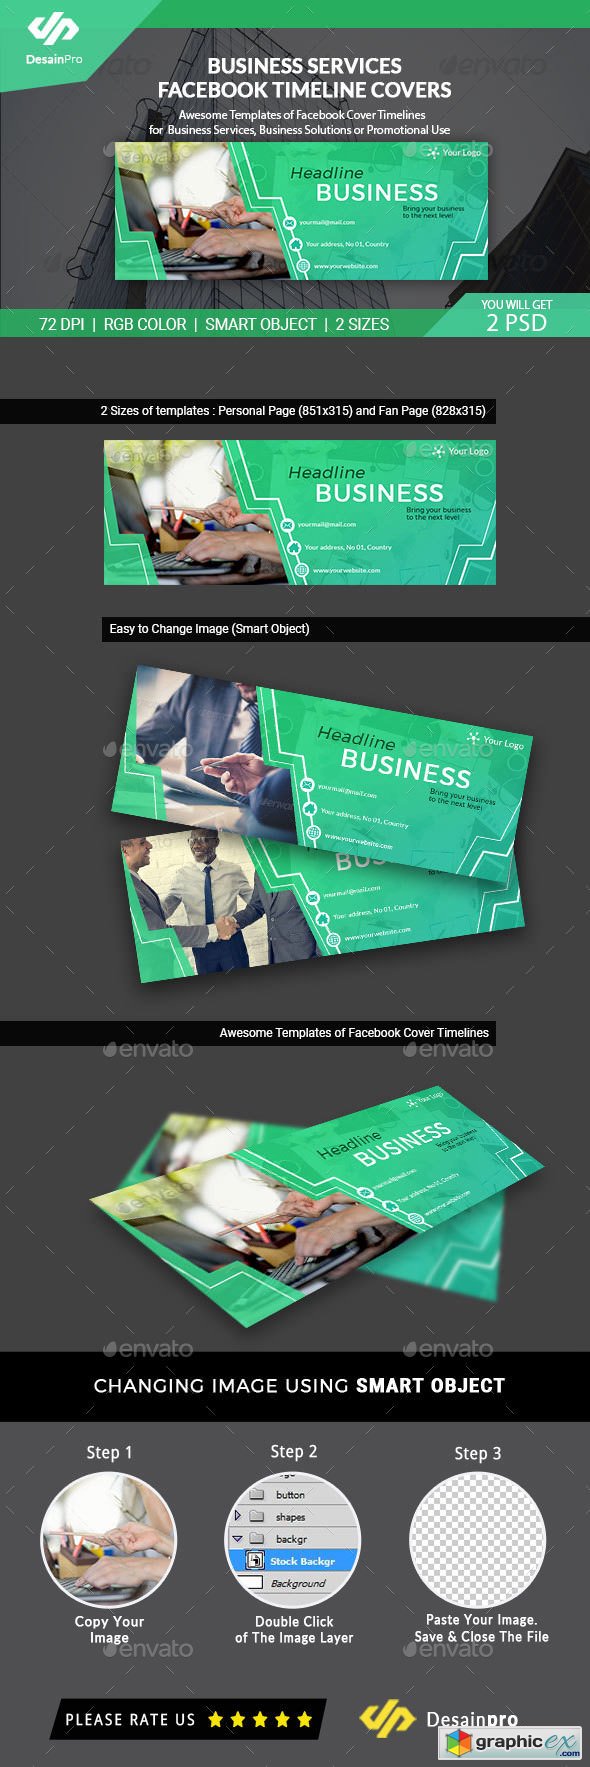 Business Services Facebook Timeline Covers - AR